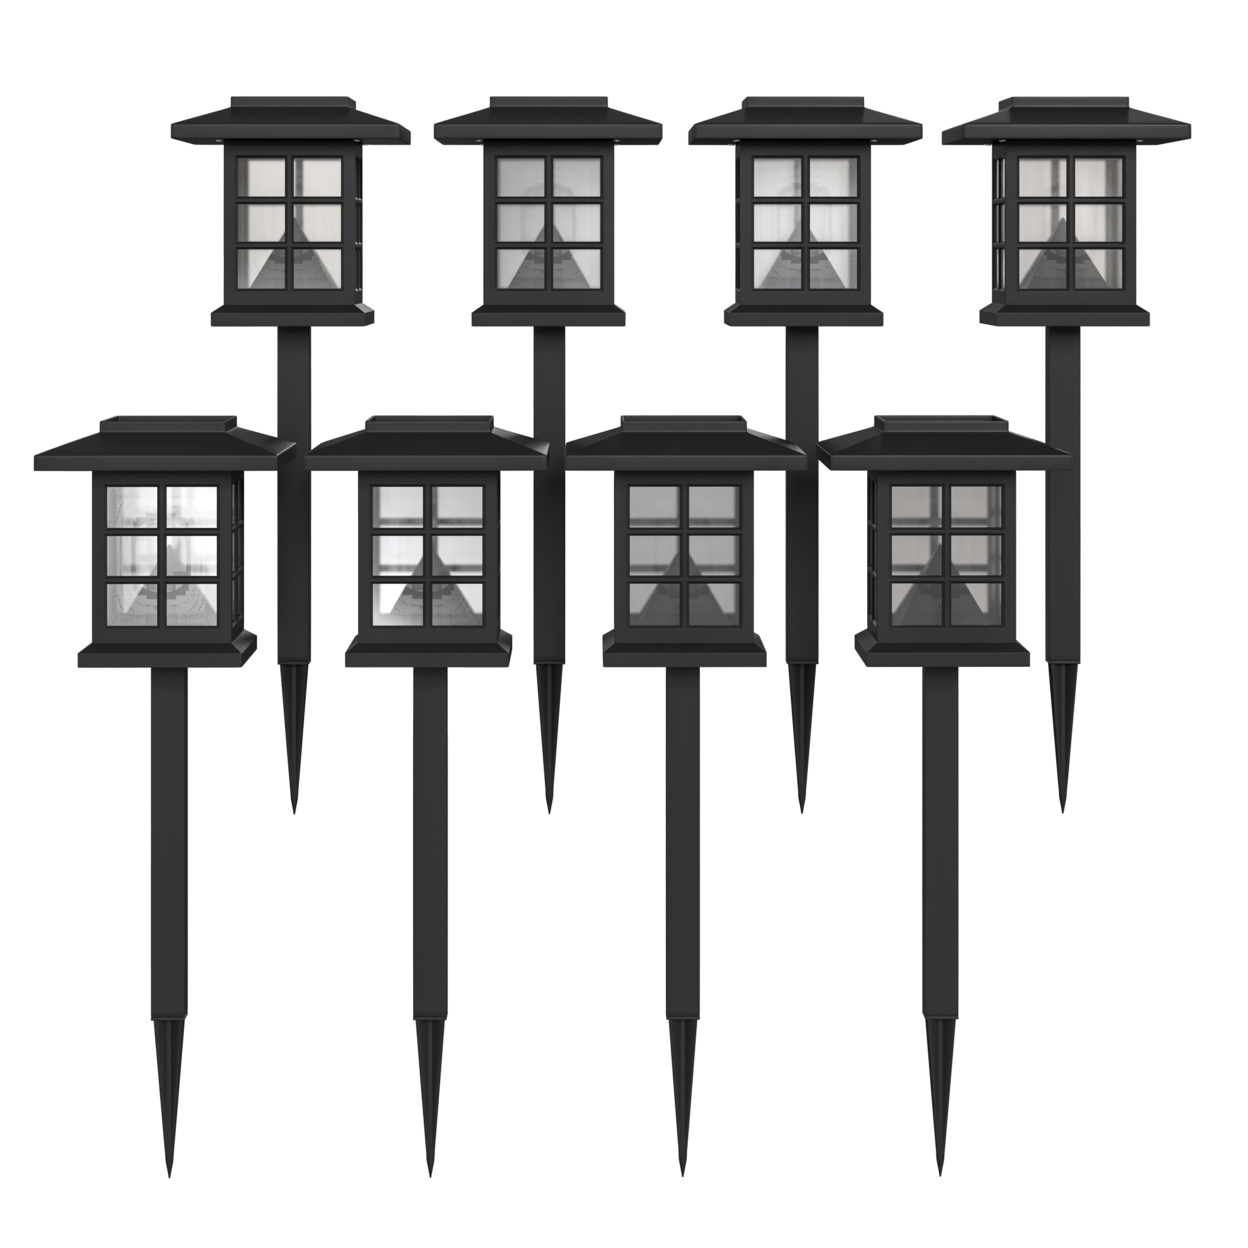 8 Pack Black Lantern Style LED Solar Lights Weather Resistant Outdoor Solar Powered Lights For Pathway, Garden, & Yard